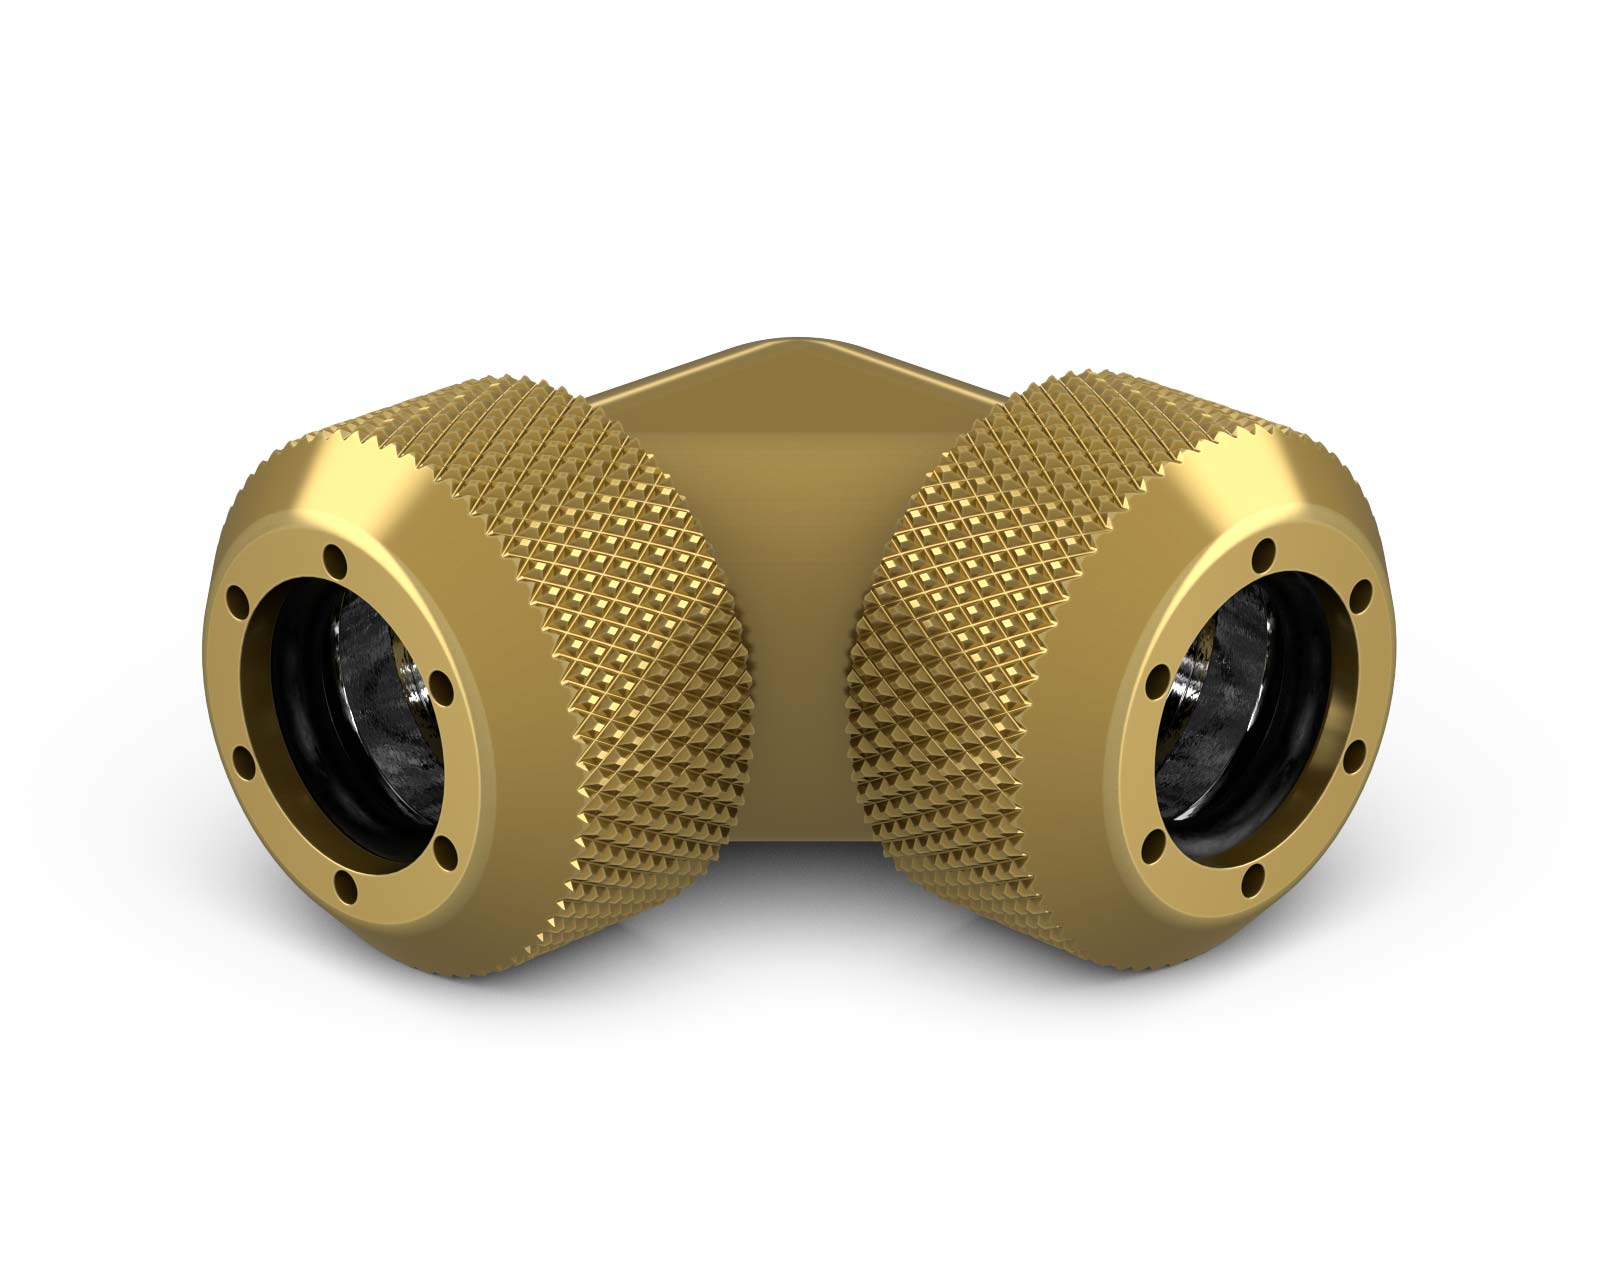 PrimoChill 1/2in. Rigid RevolverSX 90 Degree Fitting Set - PrimoChill - KEEPING IT COOL Candy Gold